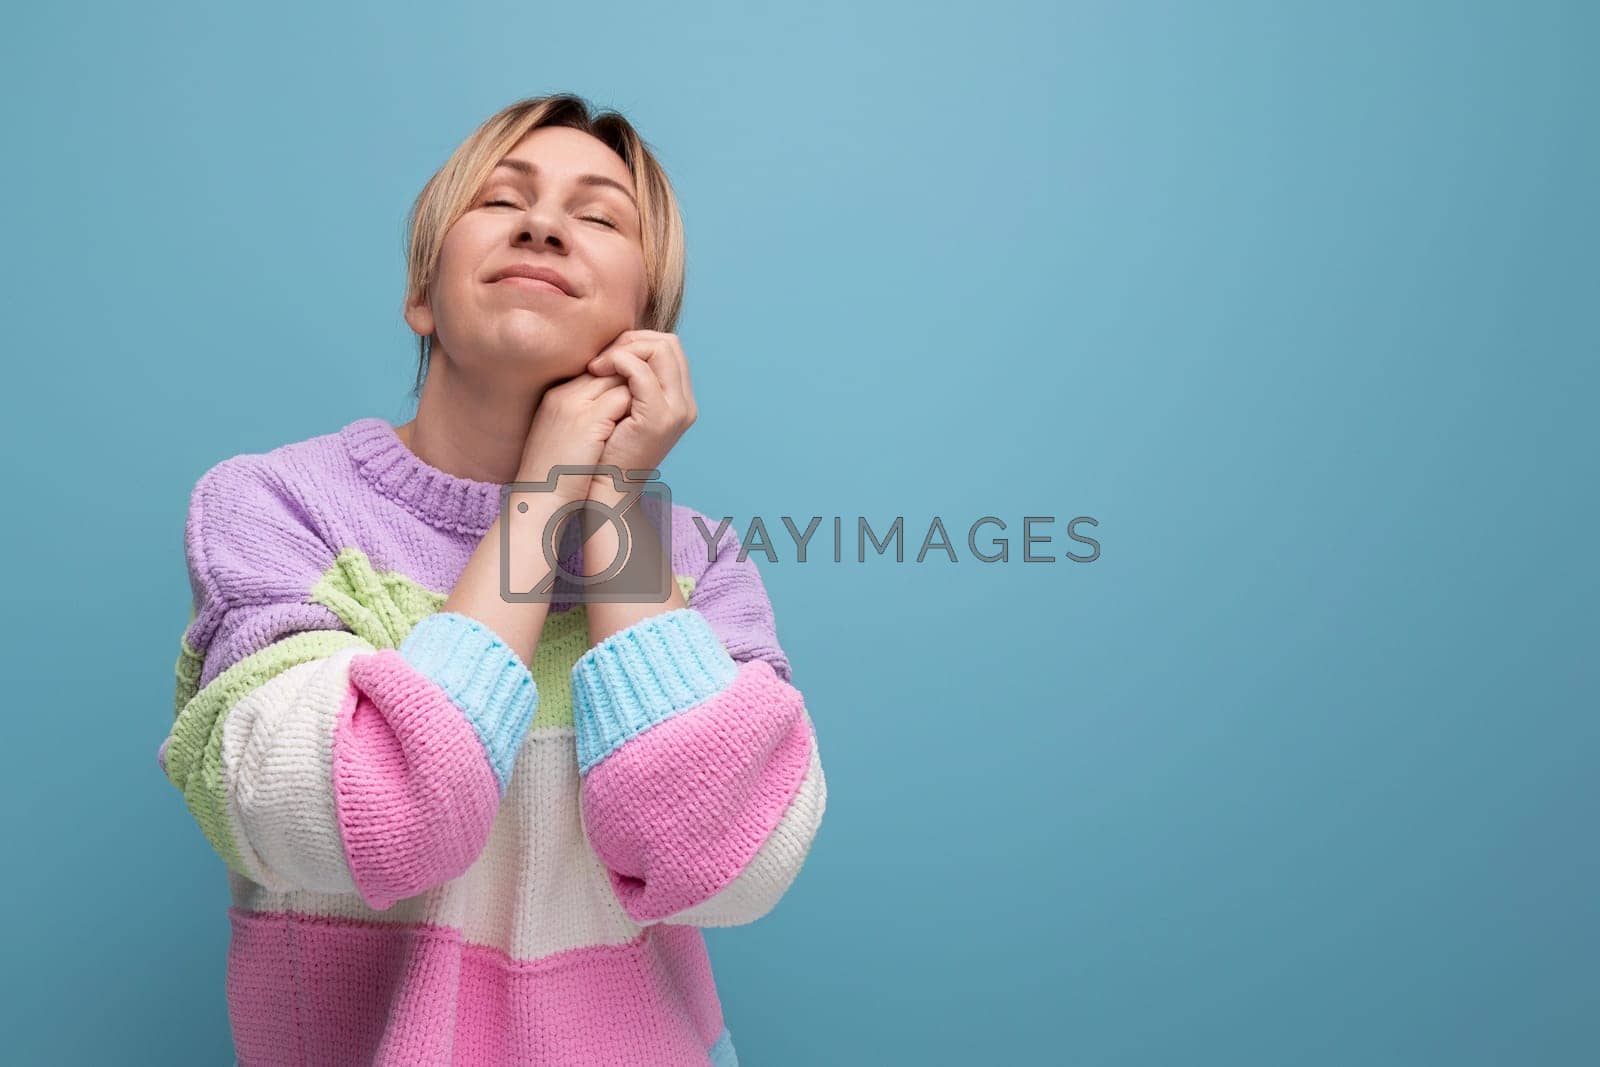 Royalty free image of dreamy blond woman in casual outfit on blue background with copy space by TRMK